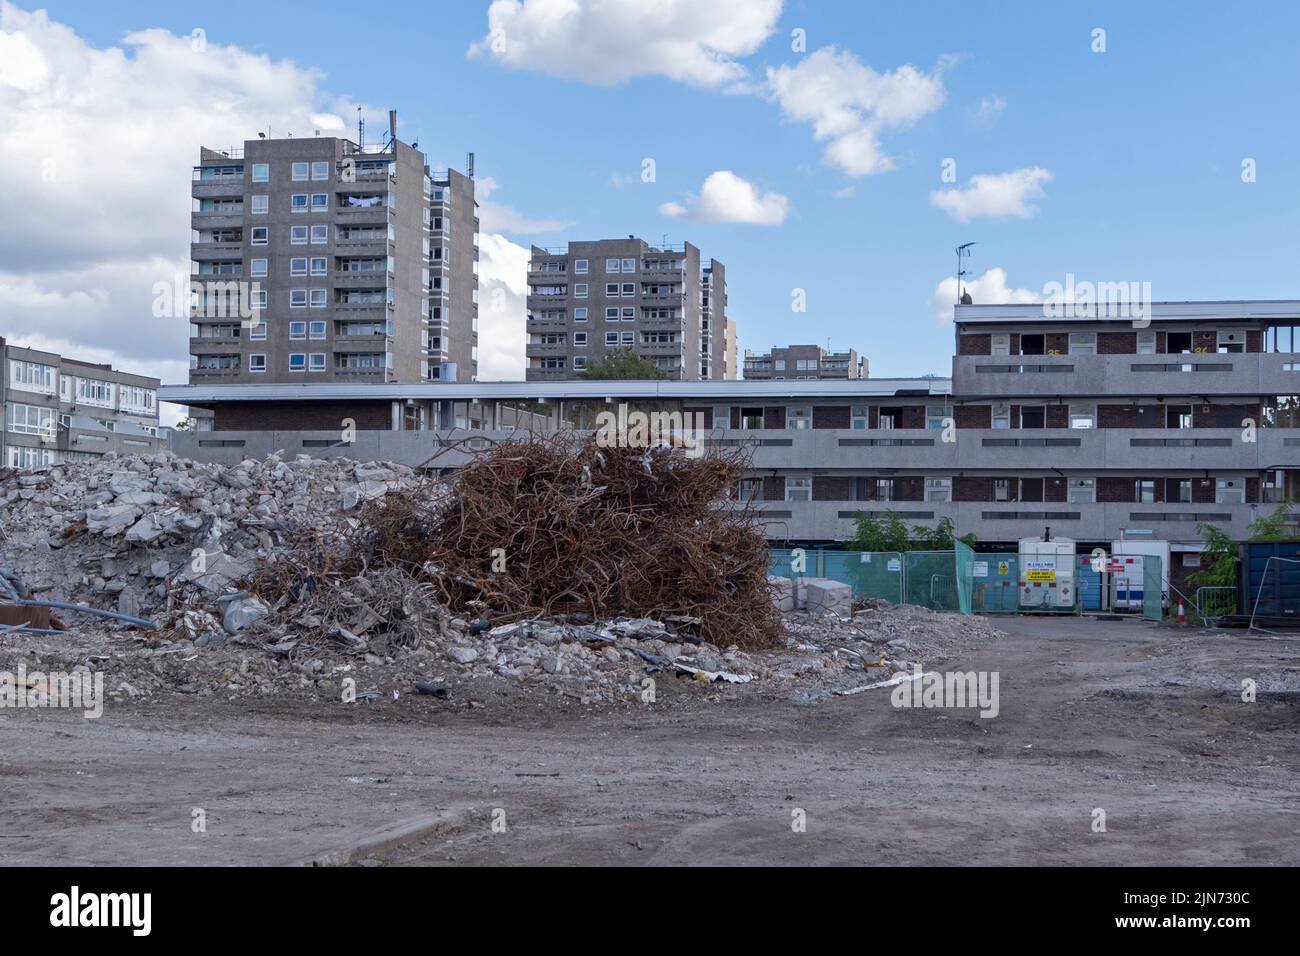 Thamesmead social housing estate in South East London currently undergoing redevelopment. England, UK. Stock Photo